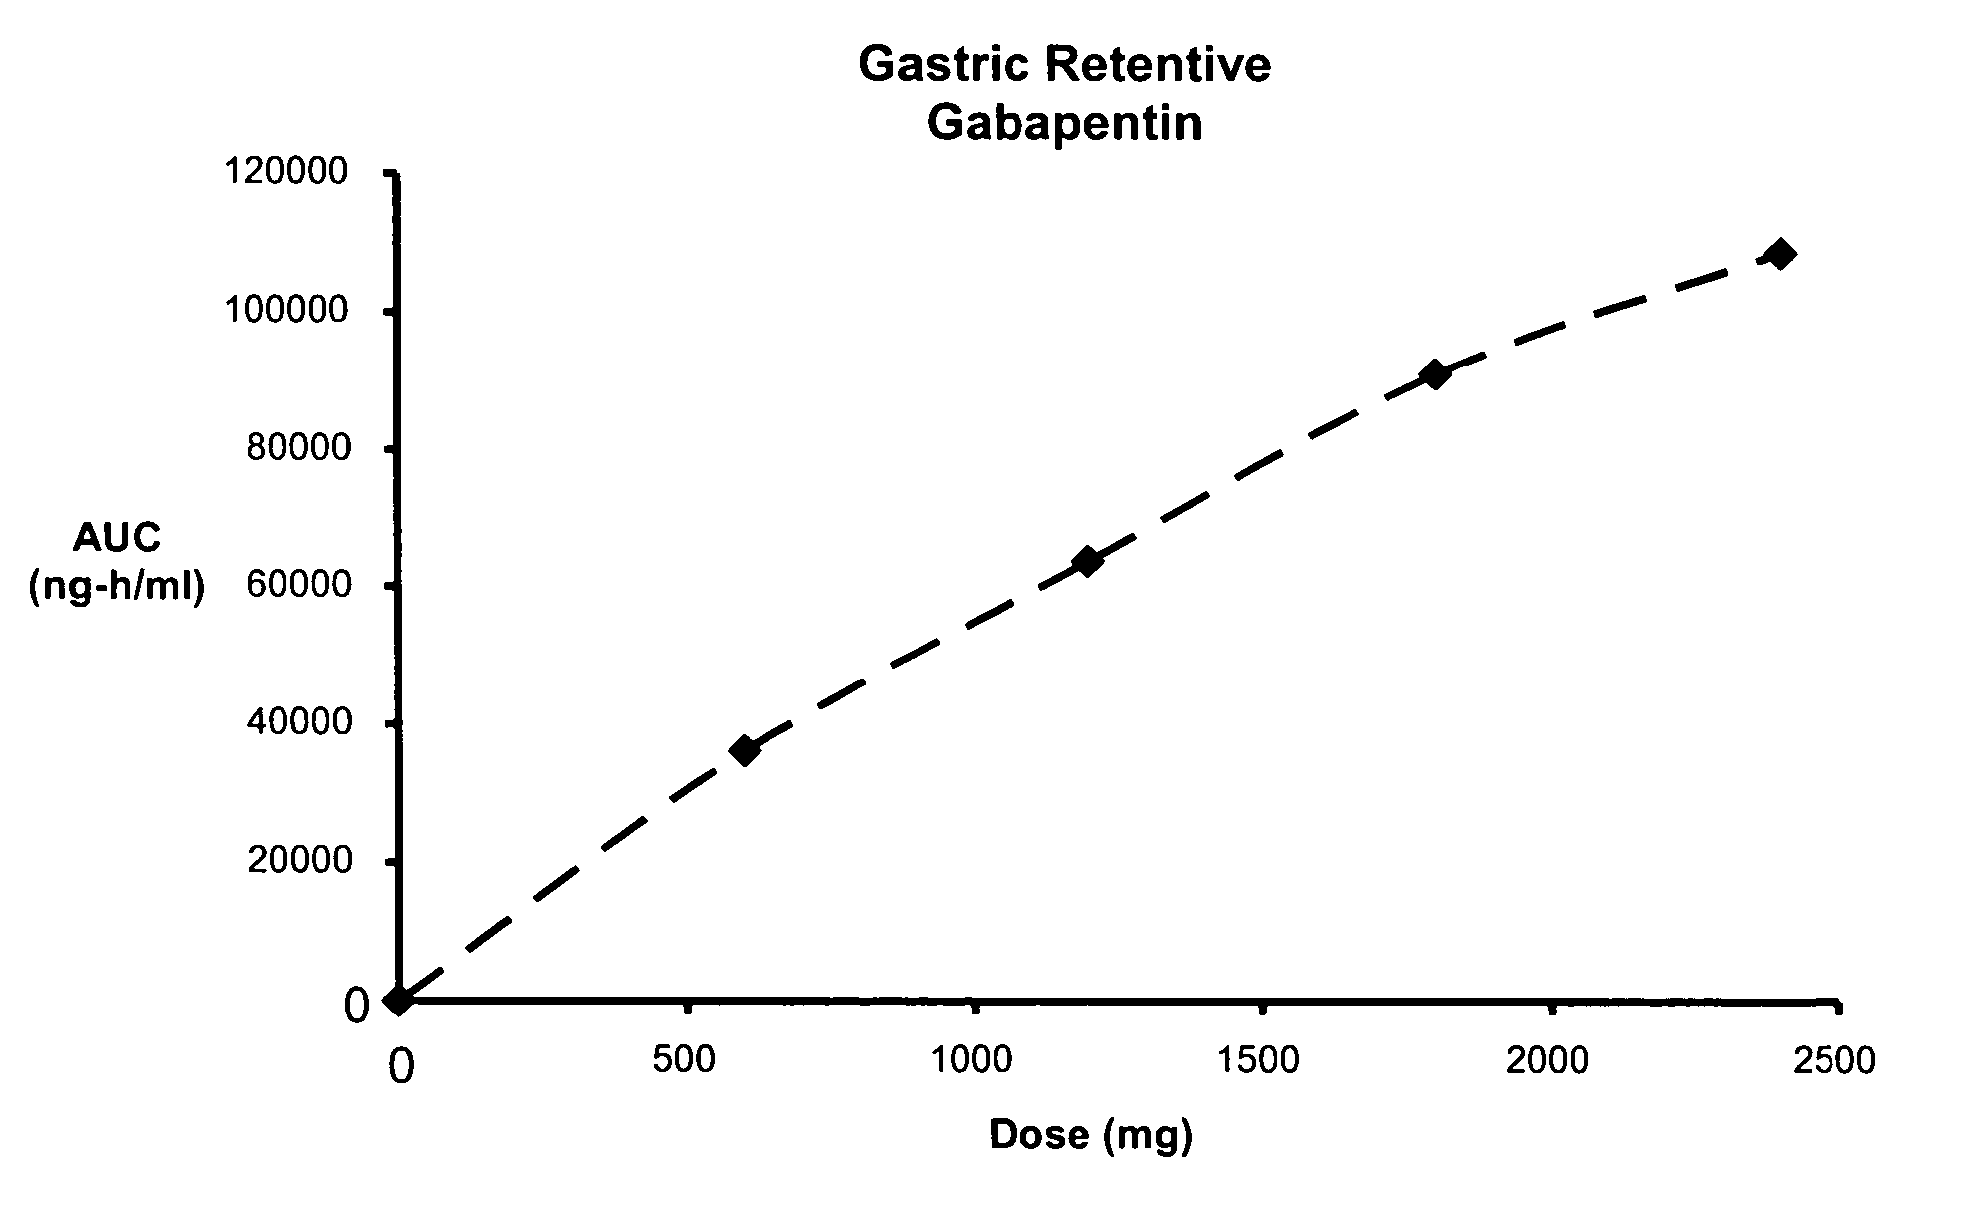 Methods of treating non-nociceptive pain states with gastric retentive gabapentin